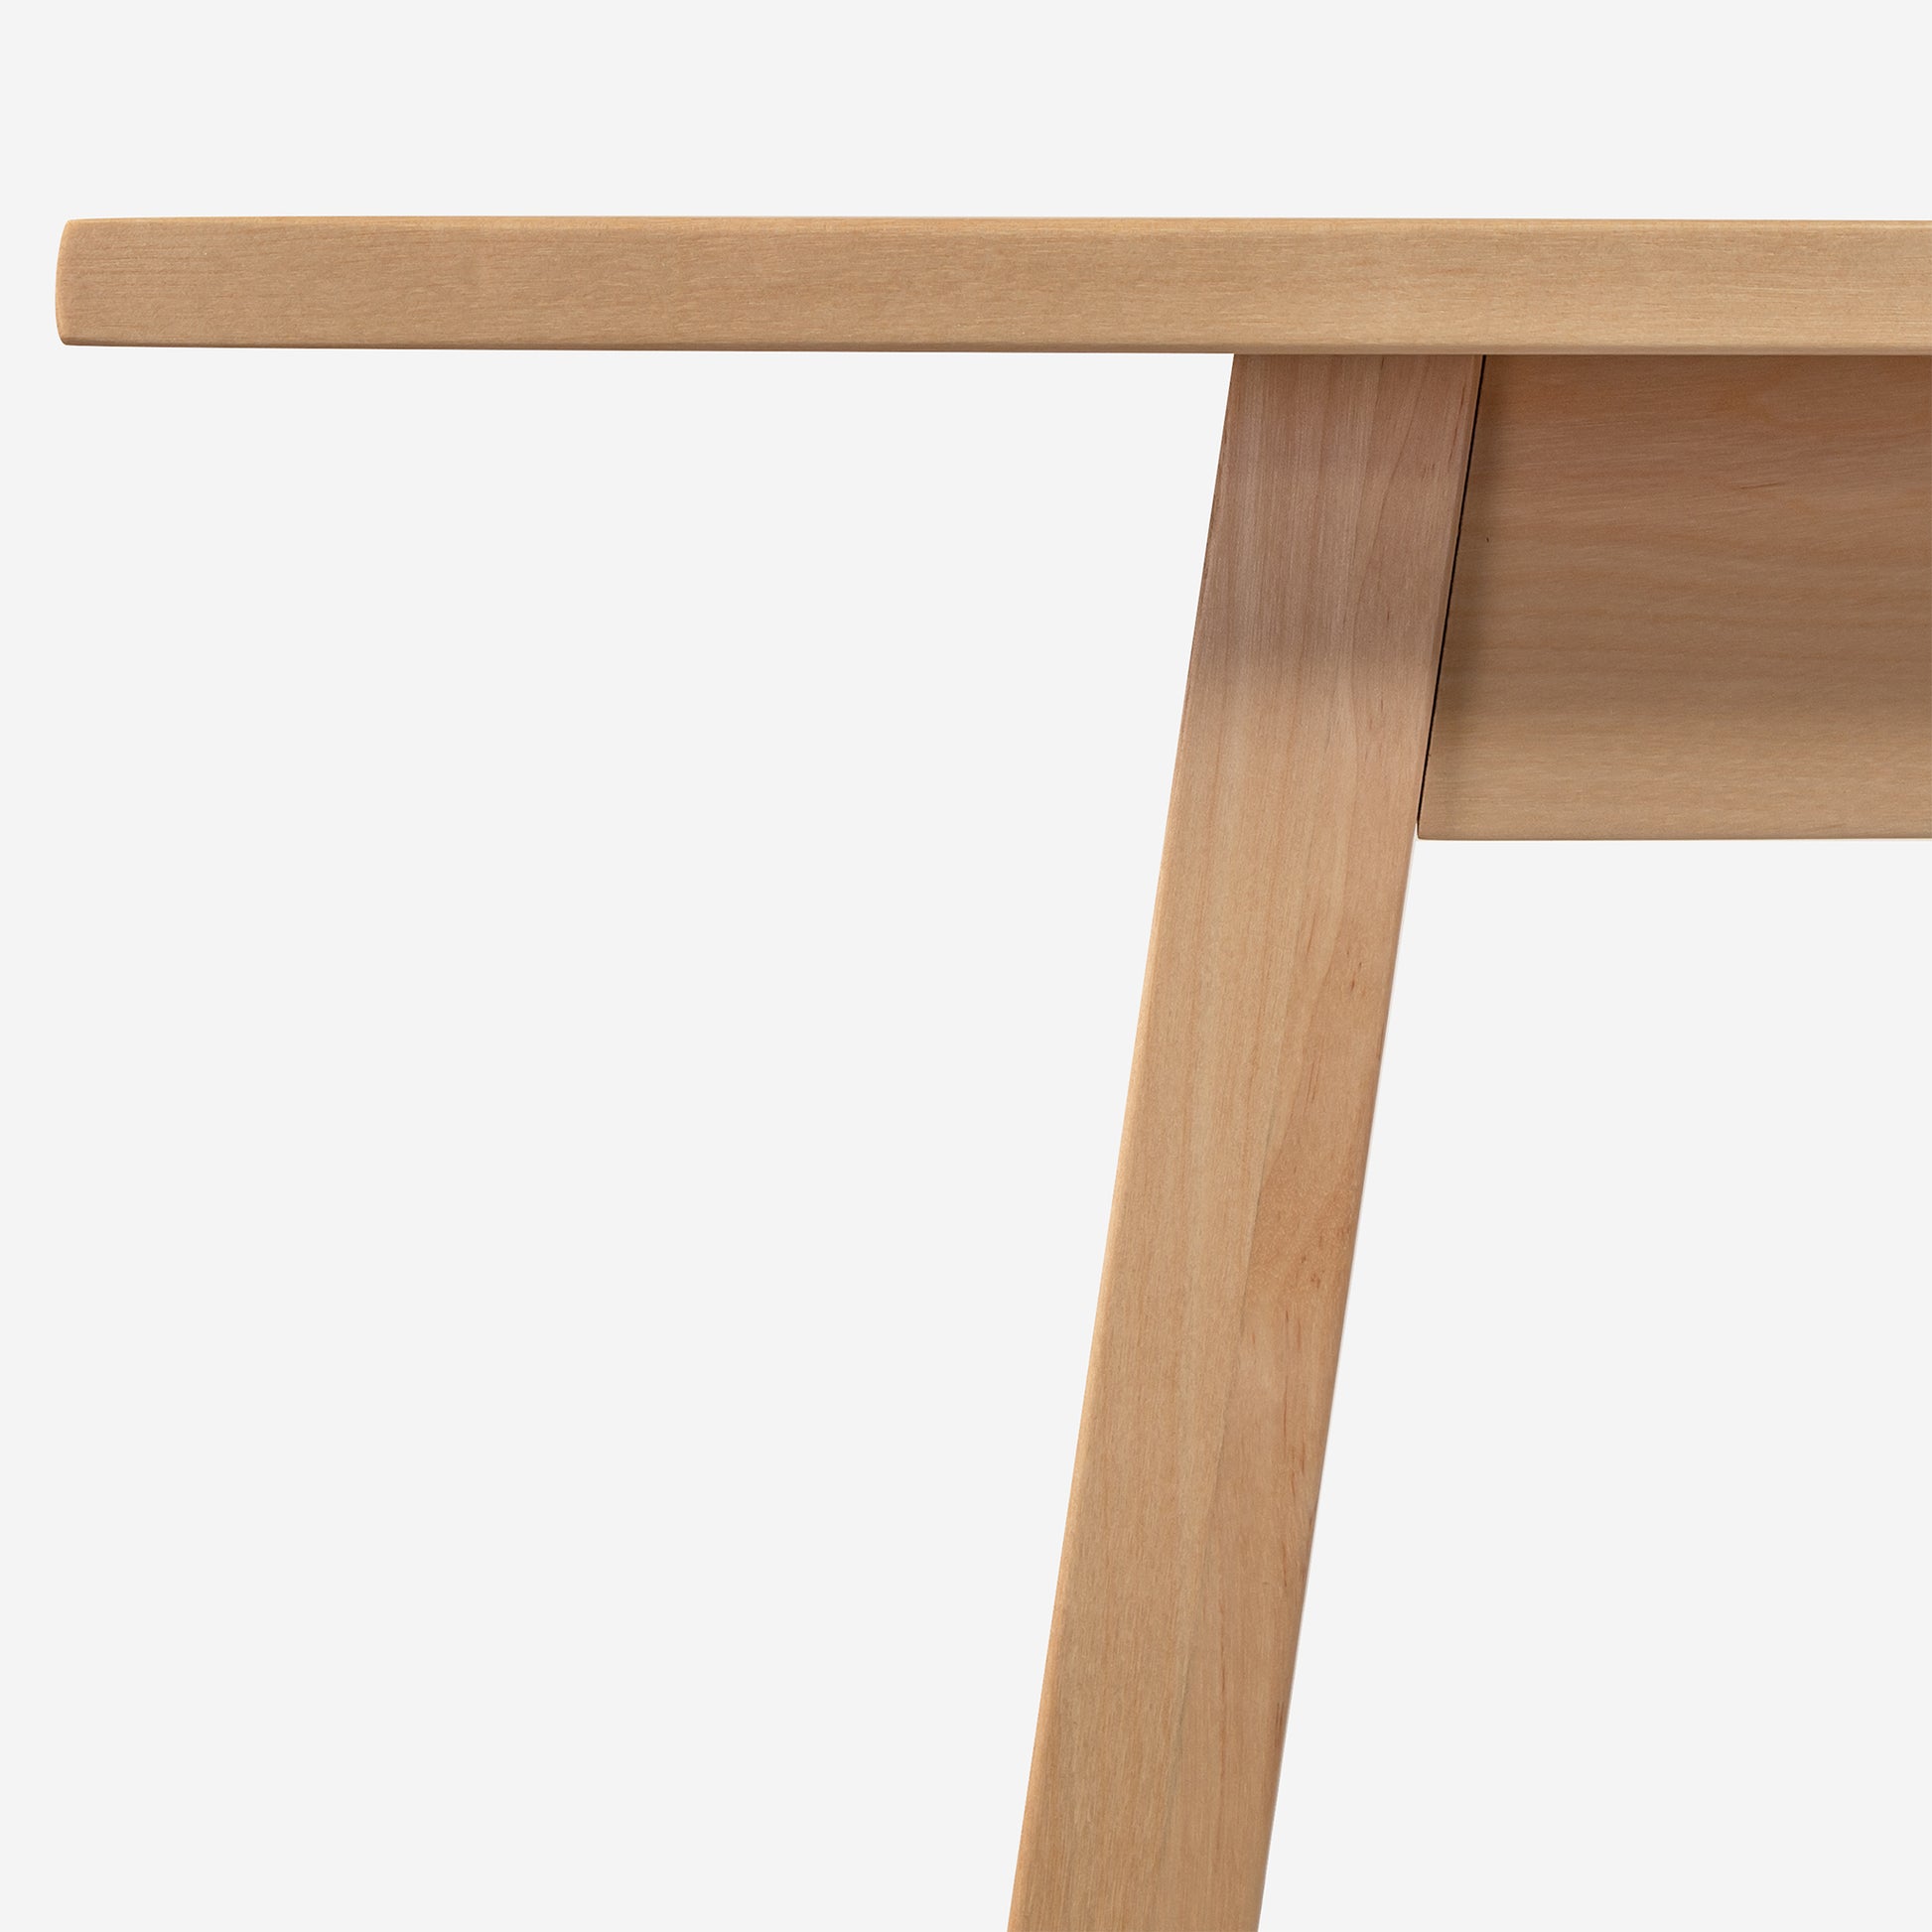 A close up image of a wooden dining table.